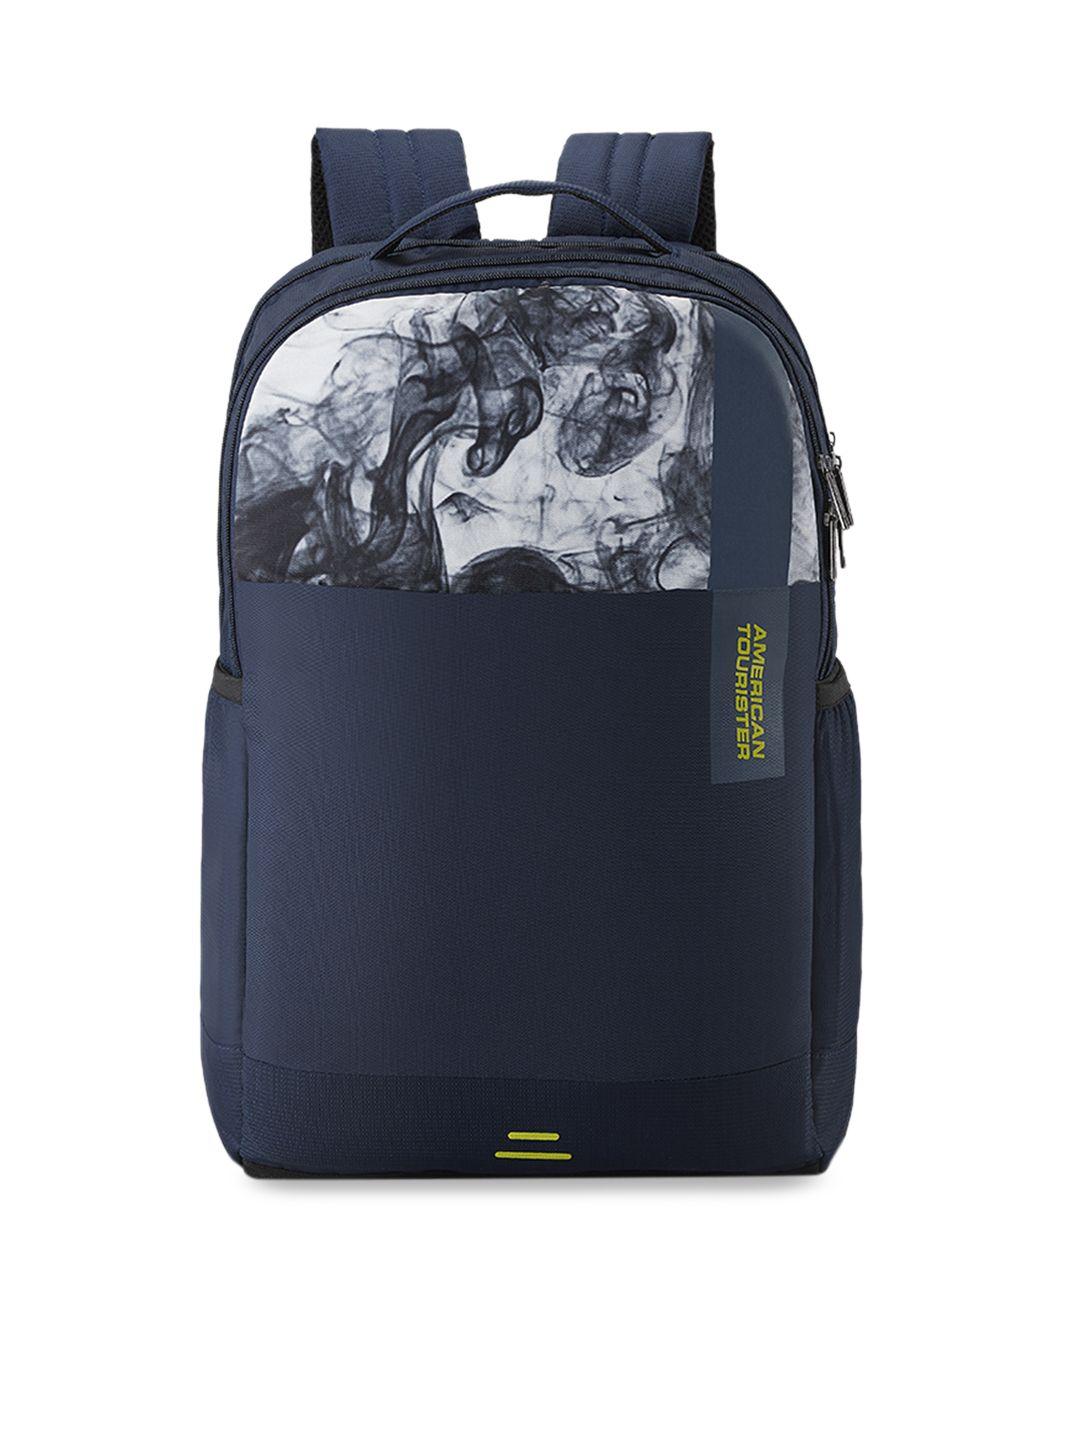 american tourister unisex navy blue backpack